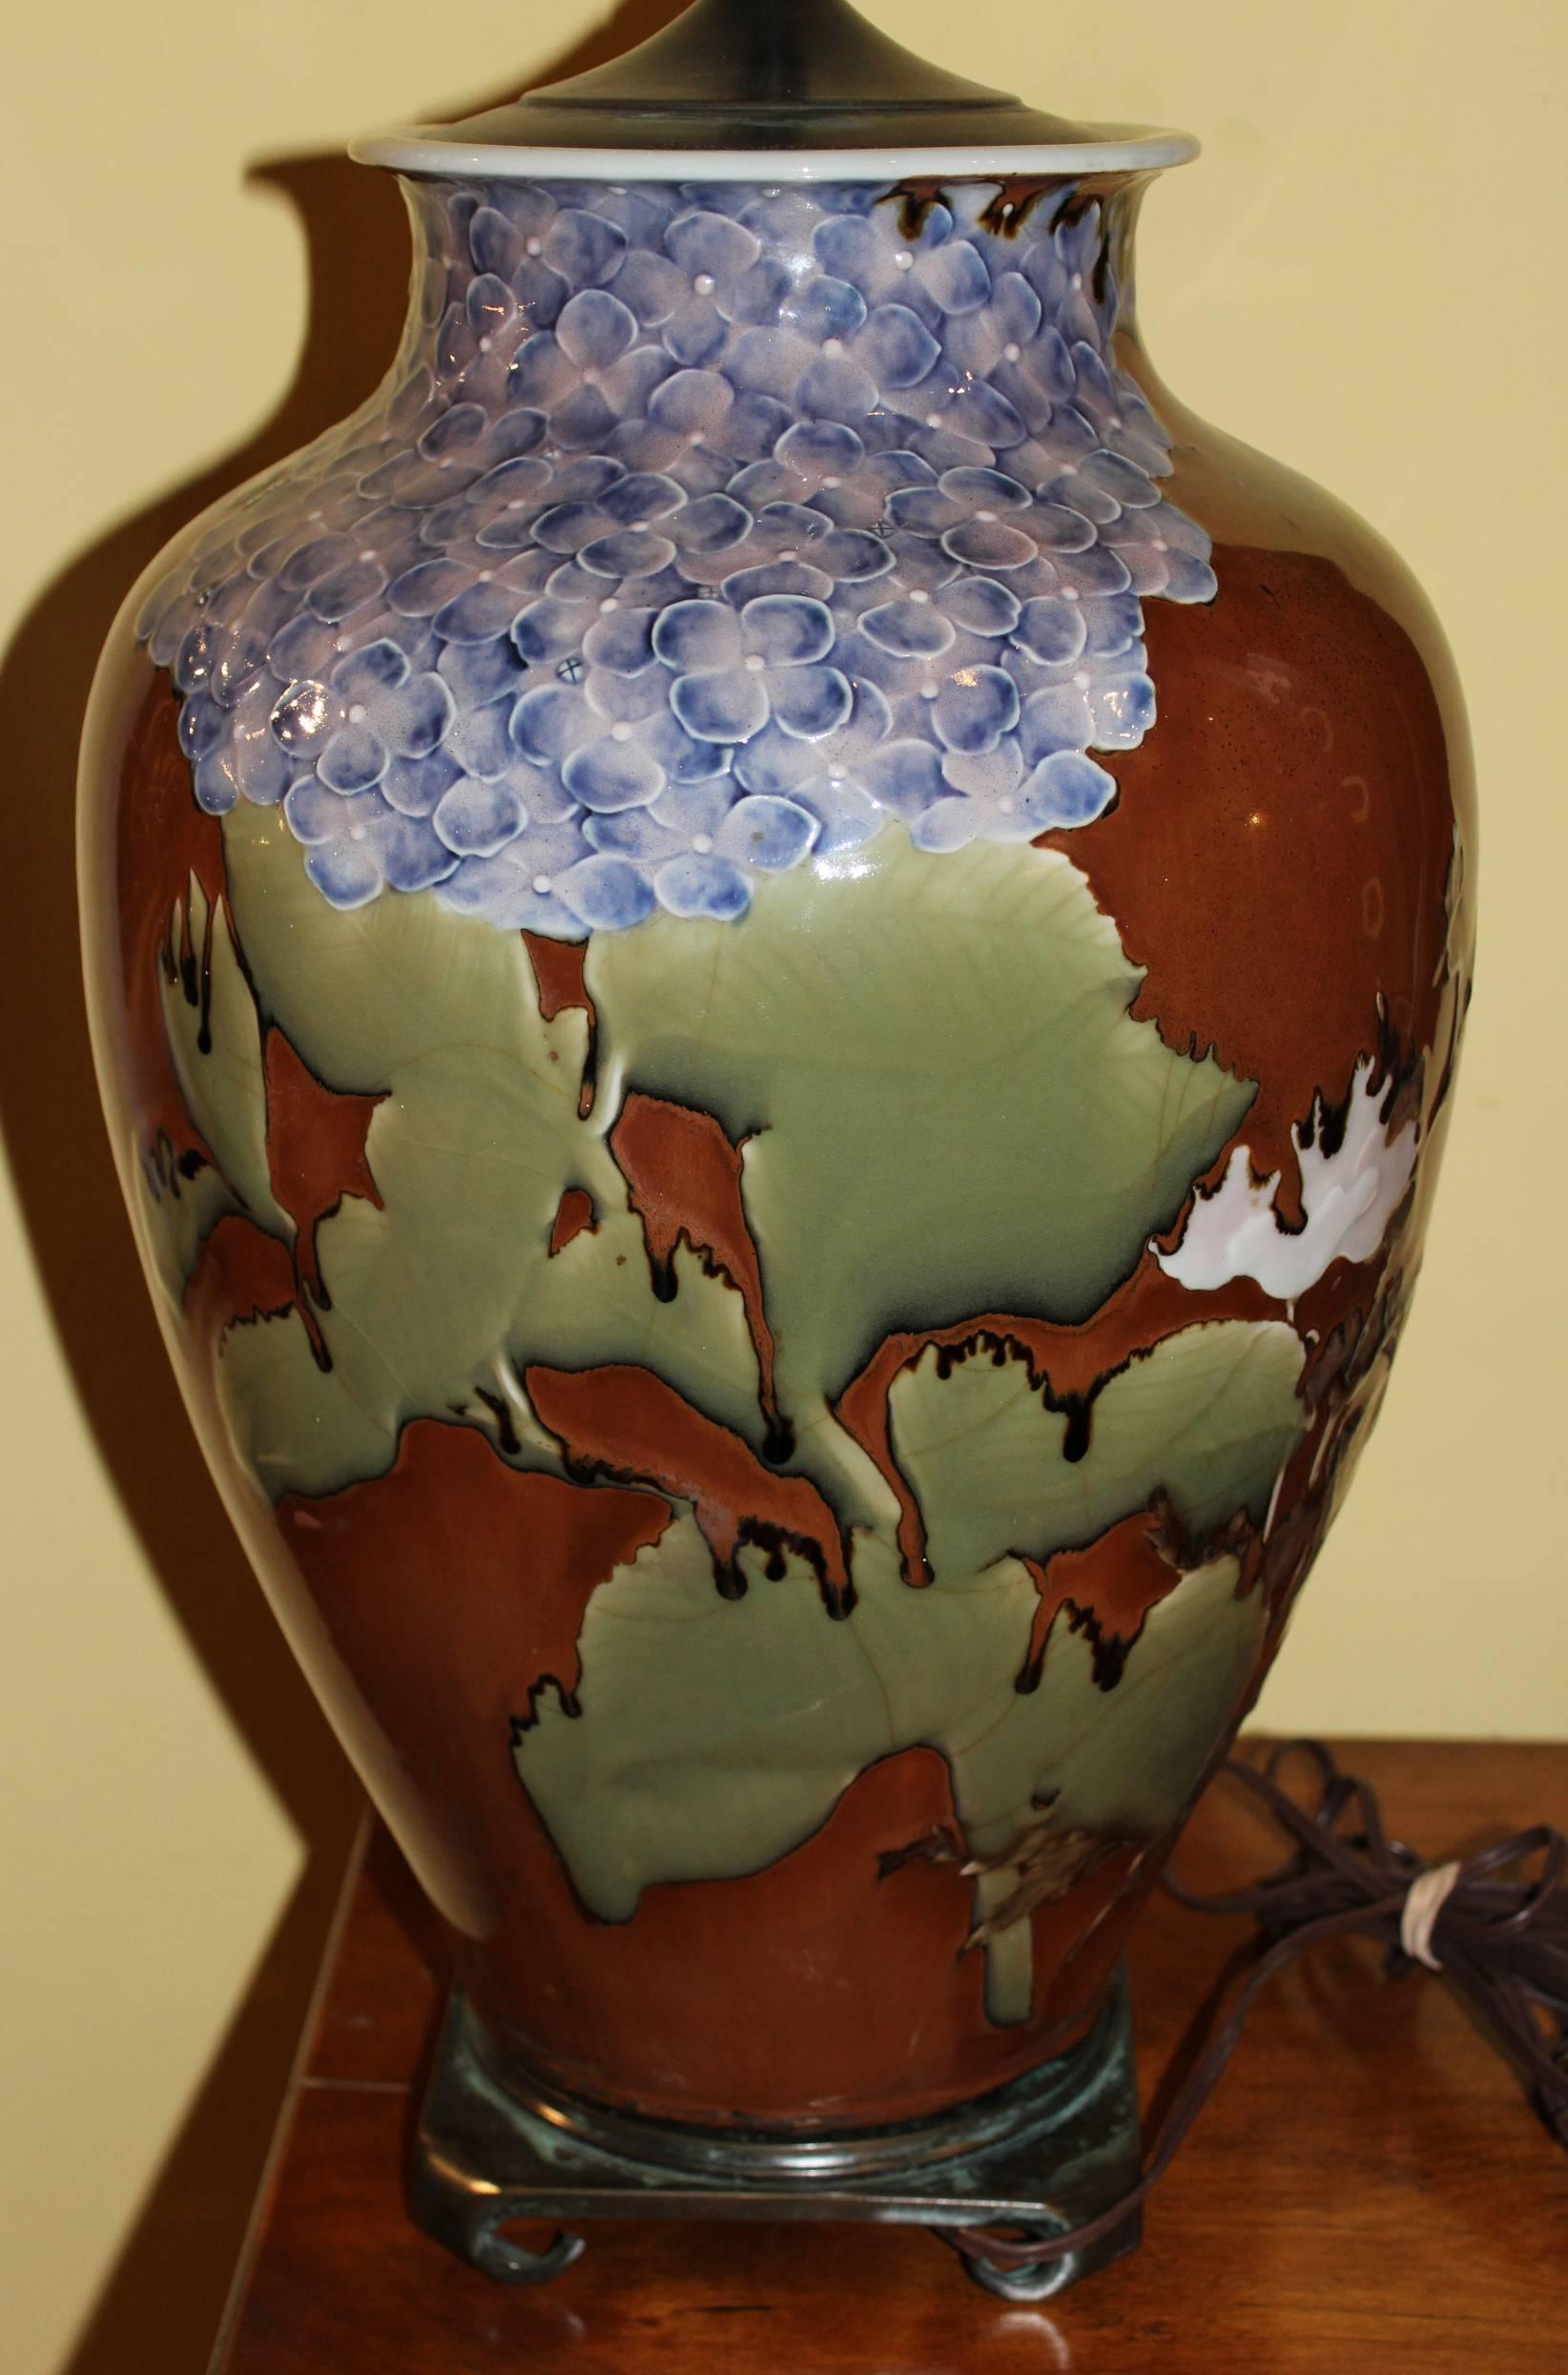 A Japanese studio porcelain vase with polychrome foliate decoration on a brown glaze, converted to a two-light lamp on a decorative metal base. The vase probably dates to the early to mid-20th century. Good working condition.